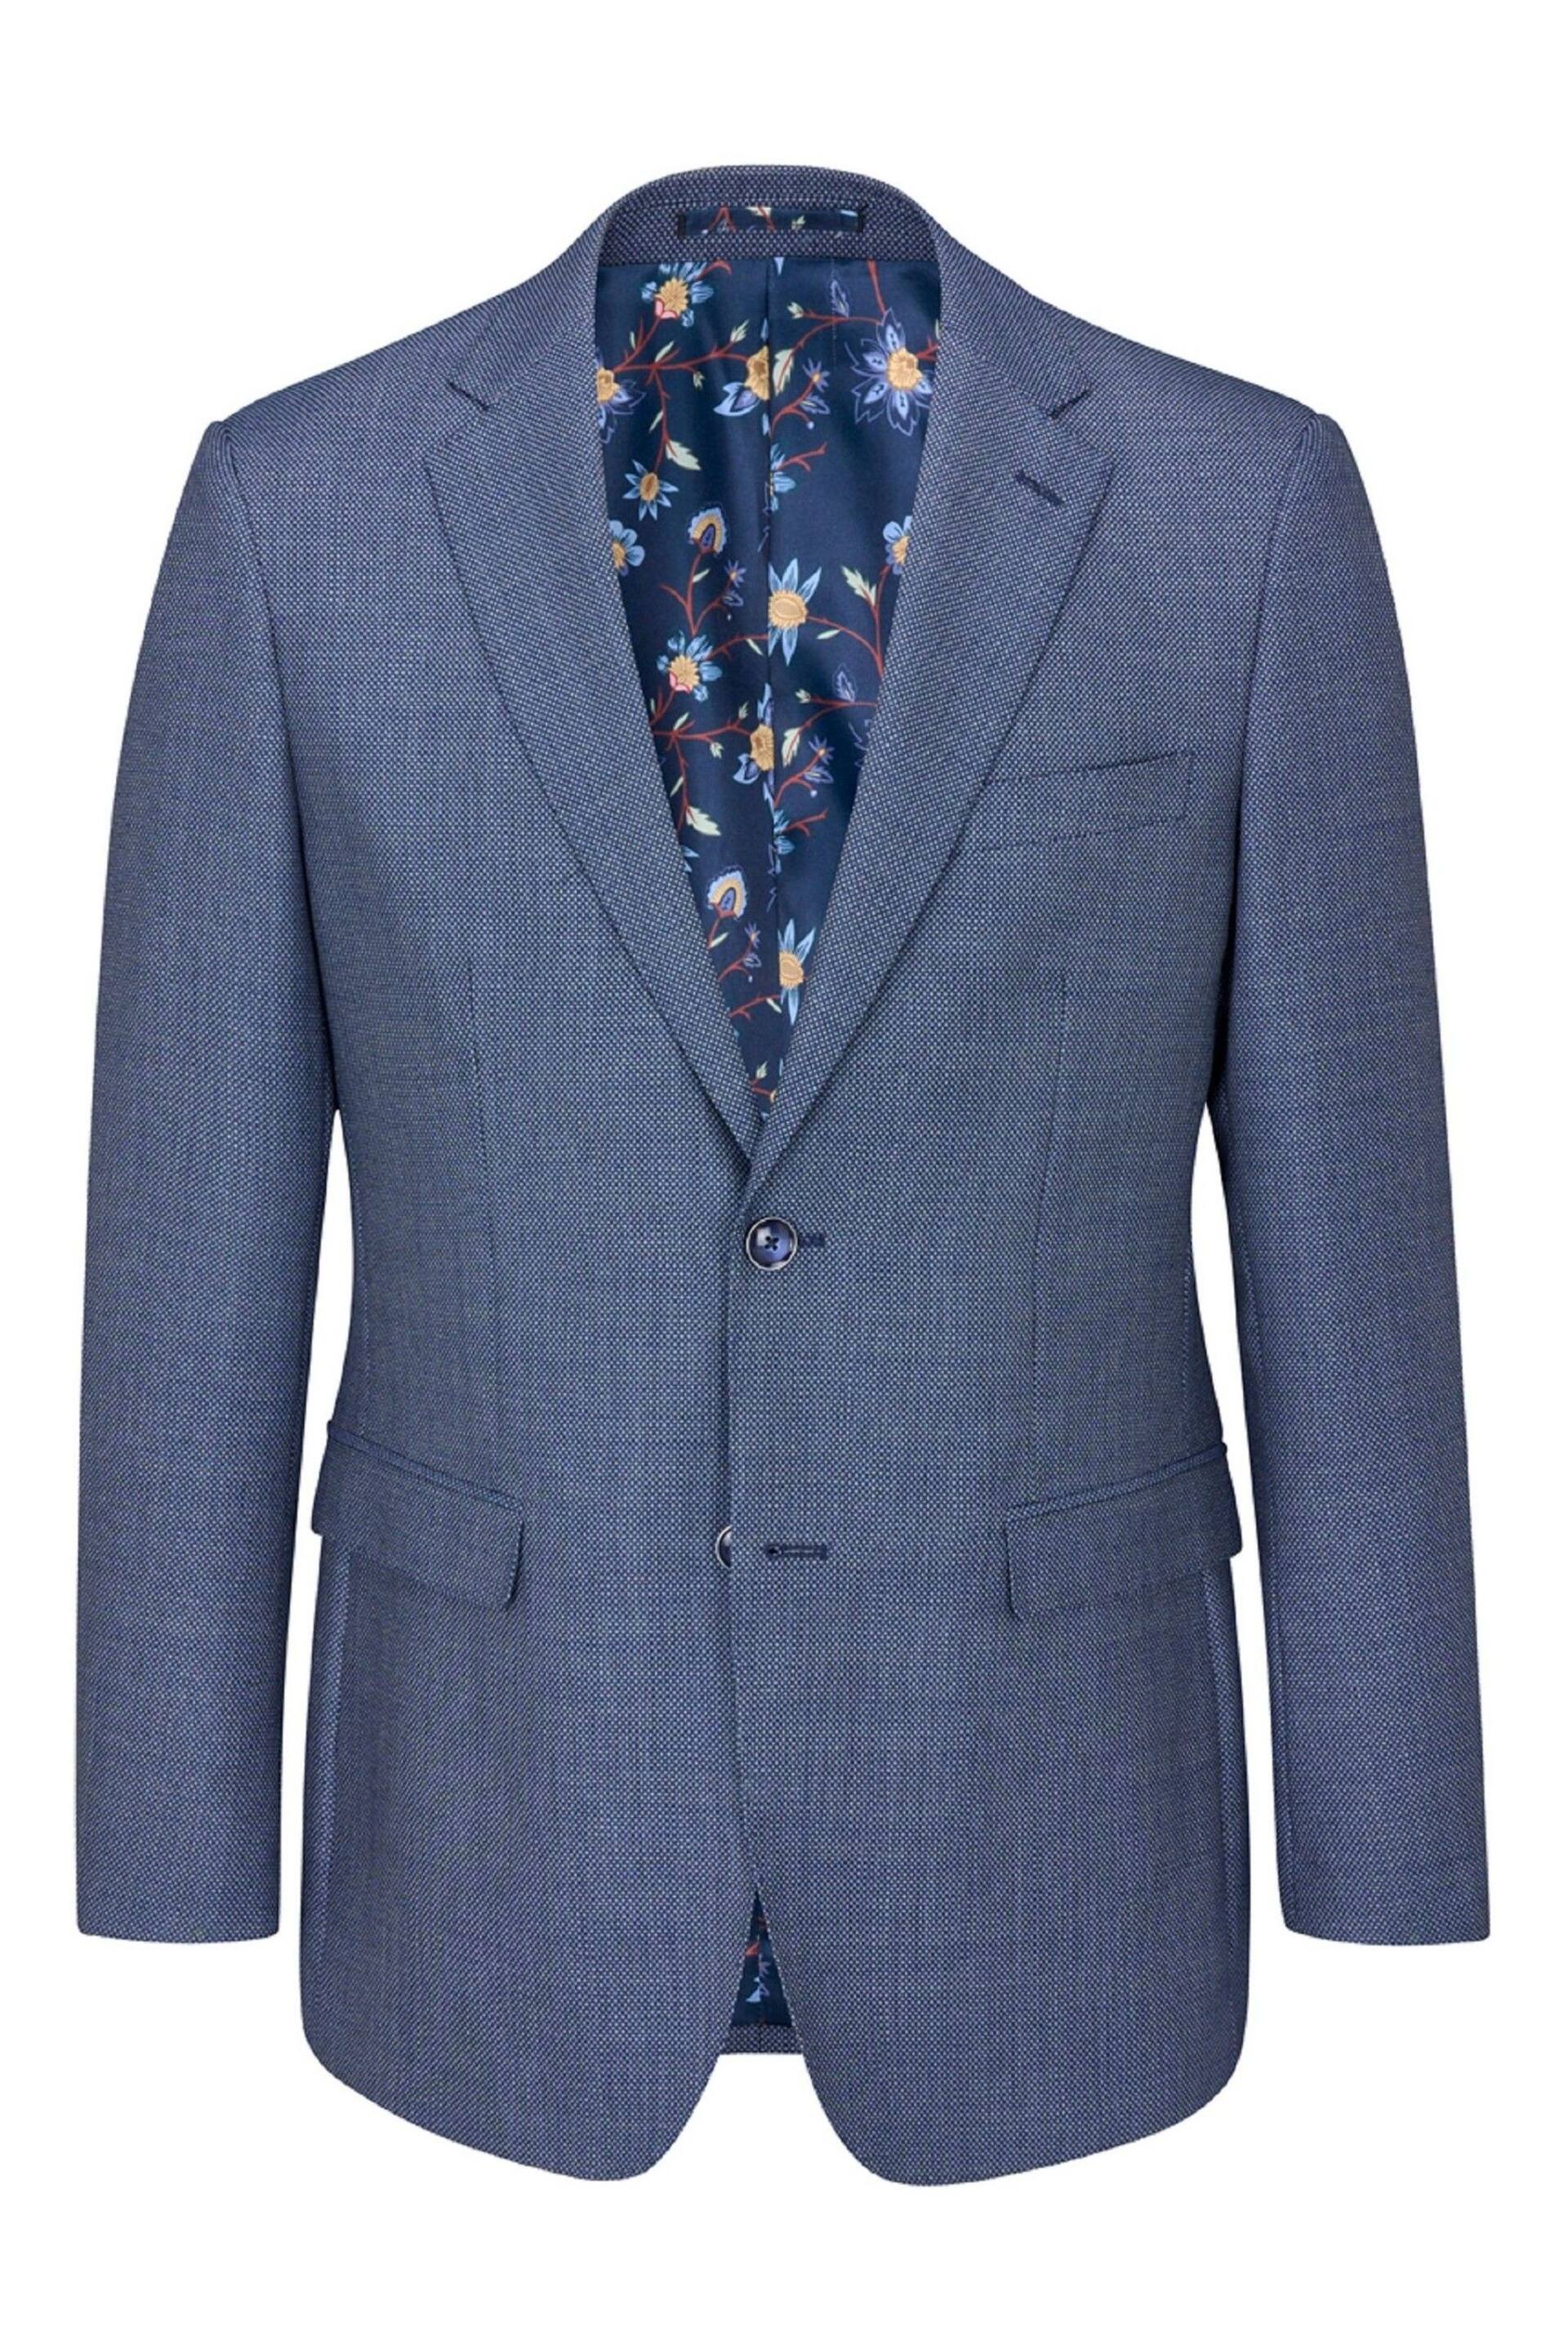 Skopes Watson Blue Tailored Fit Wool Blend Suit Jacket - Image 3 of 4